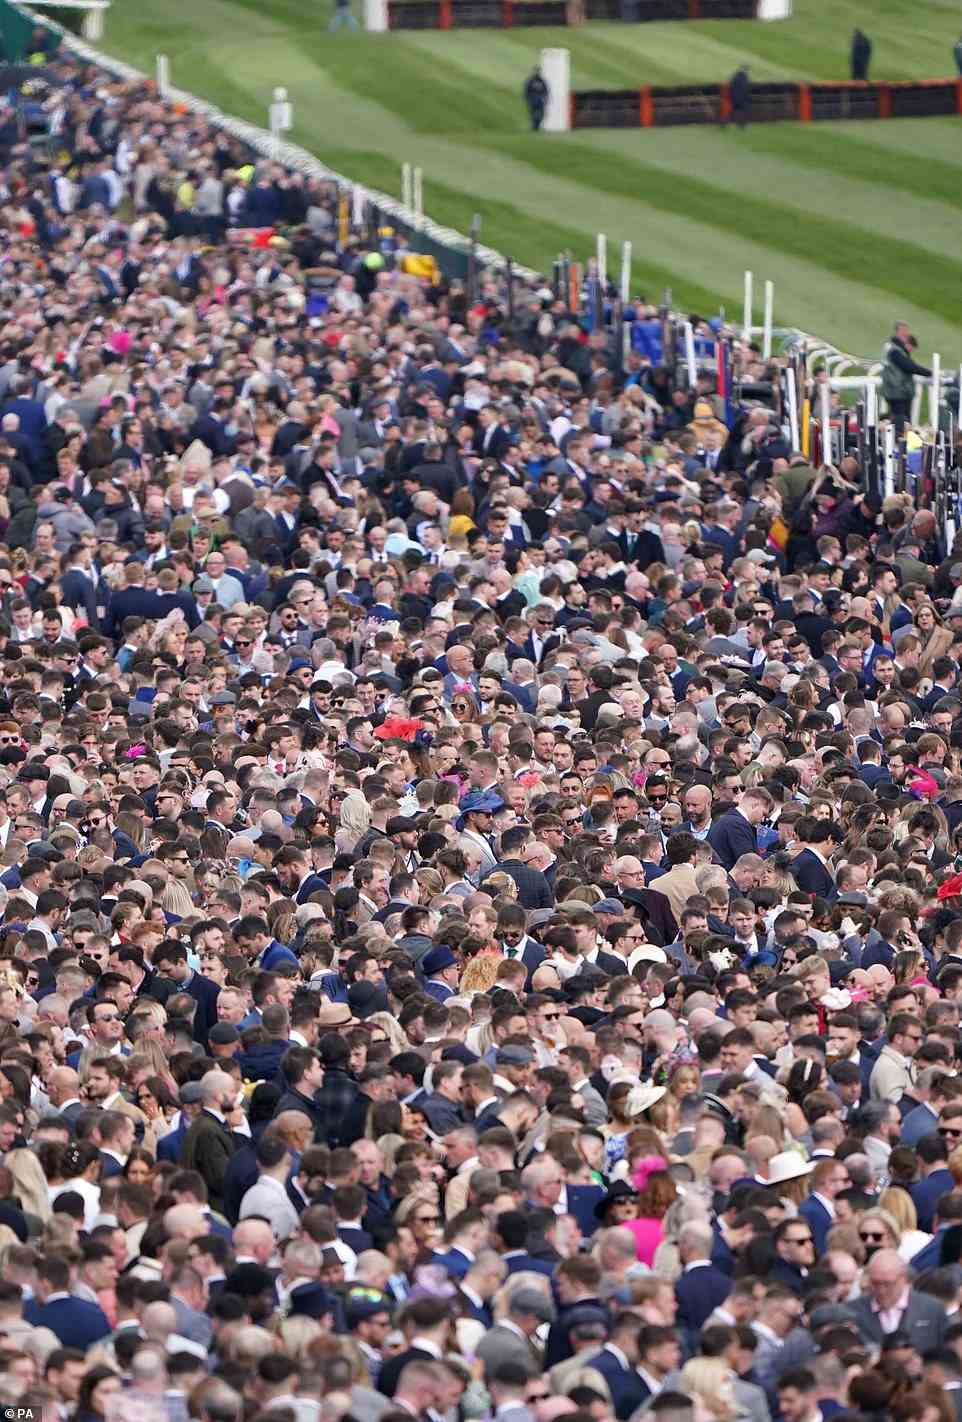 Racegoers react as they anxiously watch the EFT Construction Handicap Hurdle during Grand National Day of Ainstree 2022